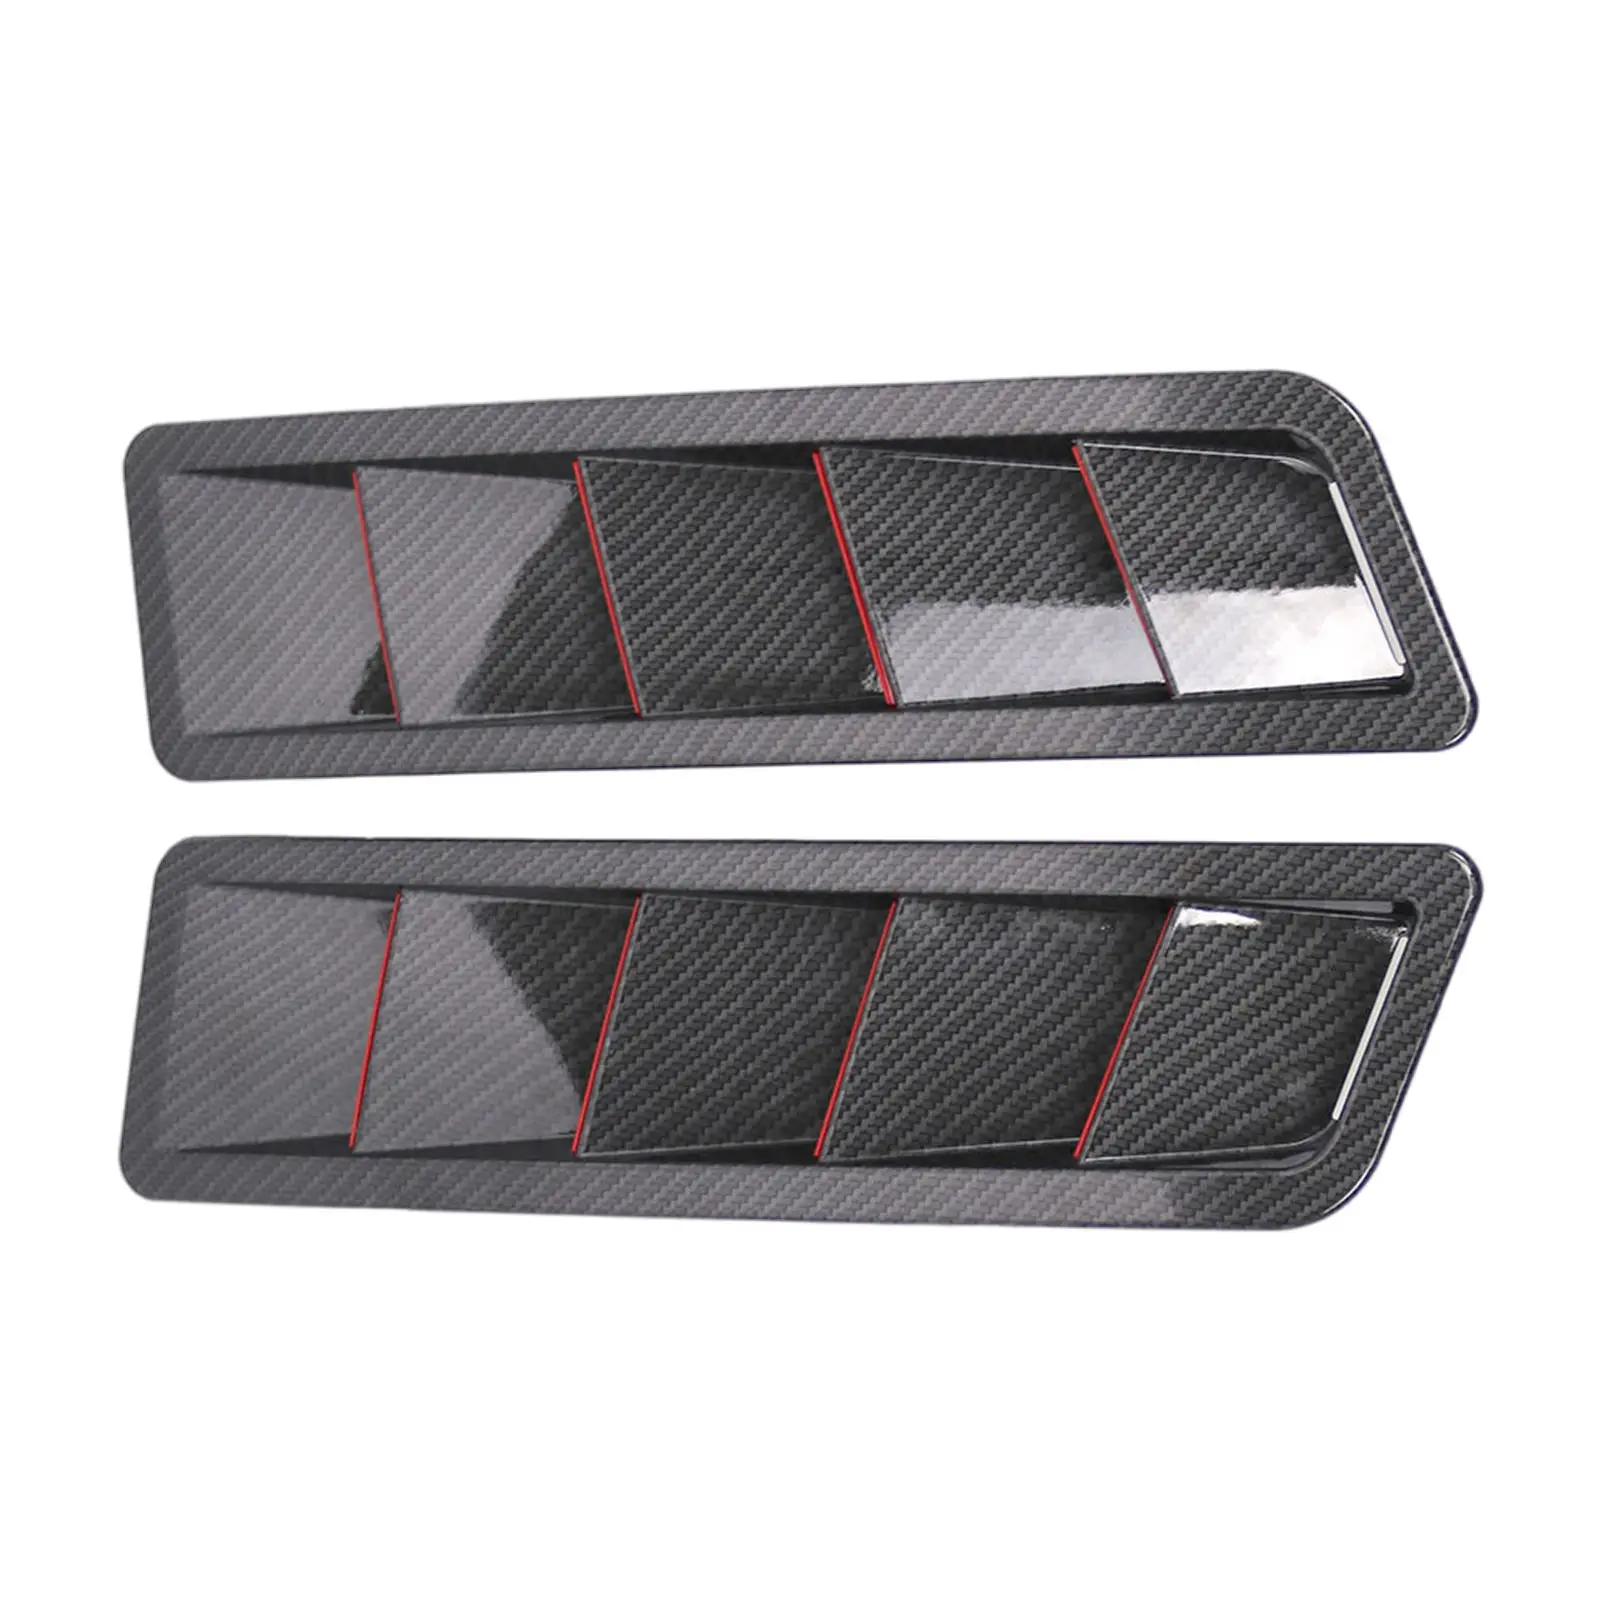 Car Hood Vent Scoop Kit Vents Bonnet Cover Air Flow Intake Louver Vehicles Fitment Louvers Fit for SUV Truck Replacement Parts